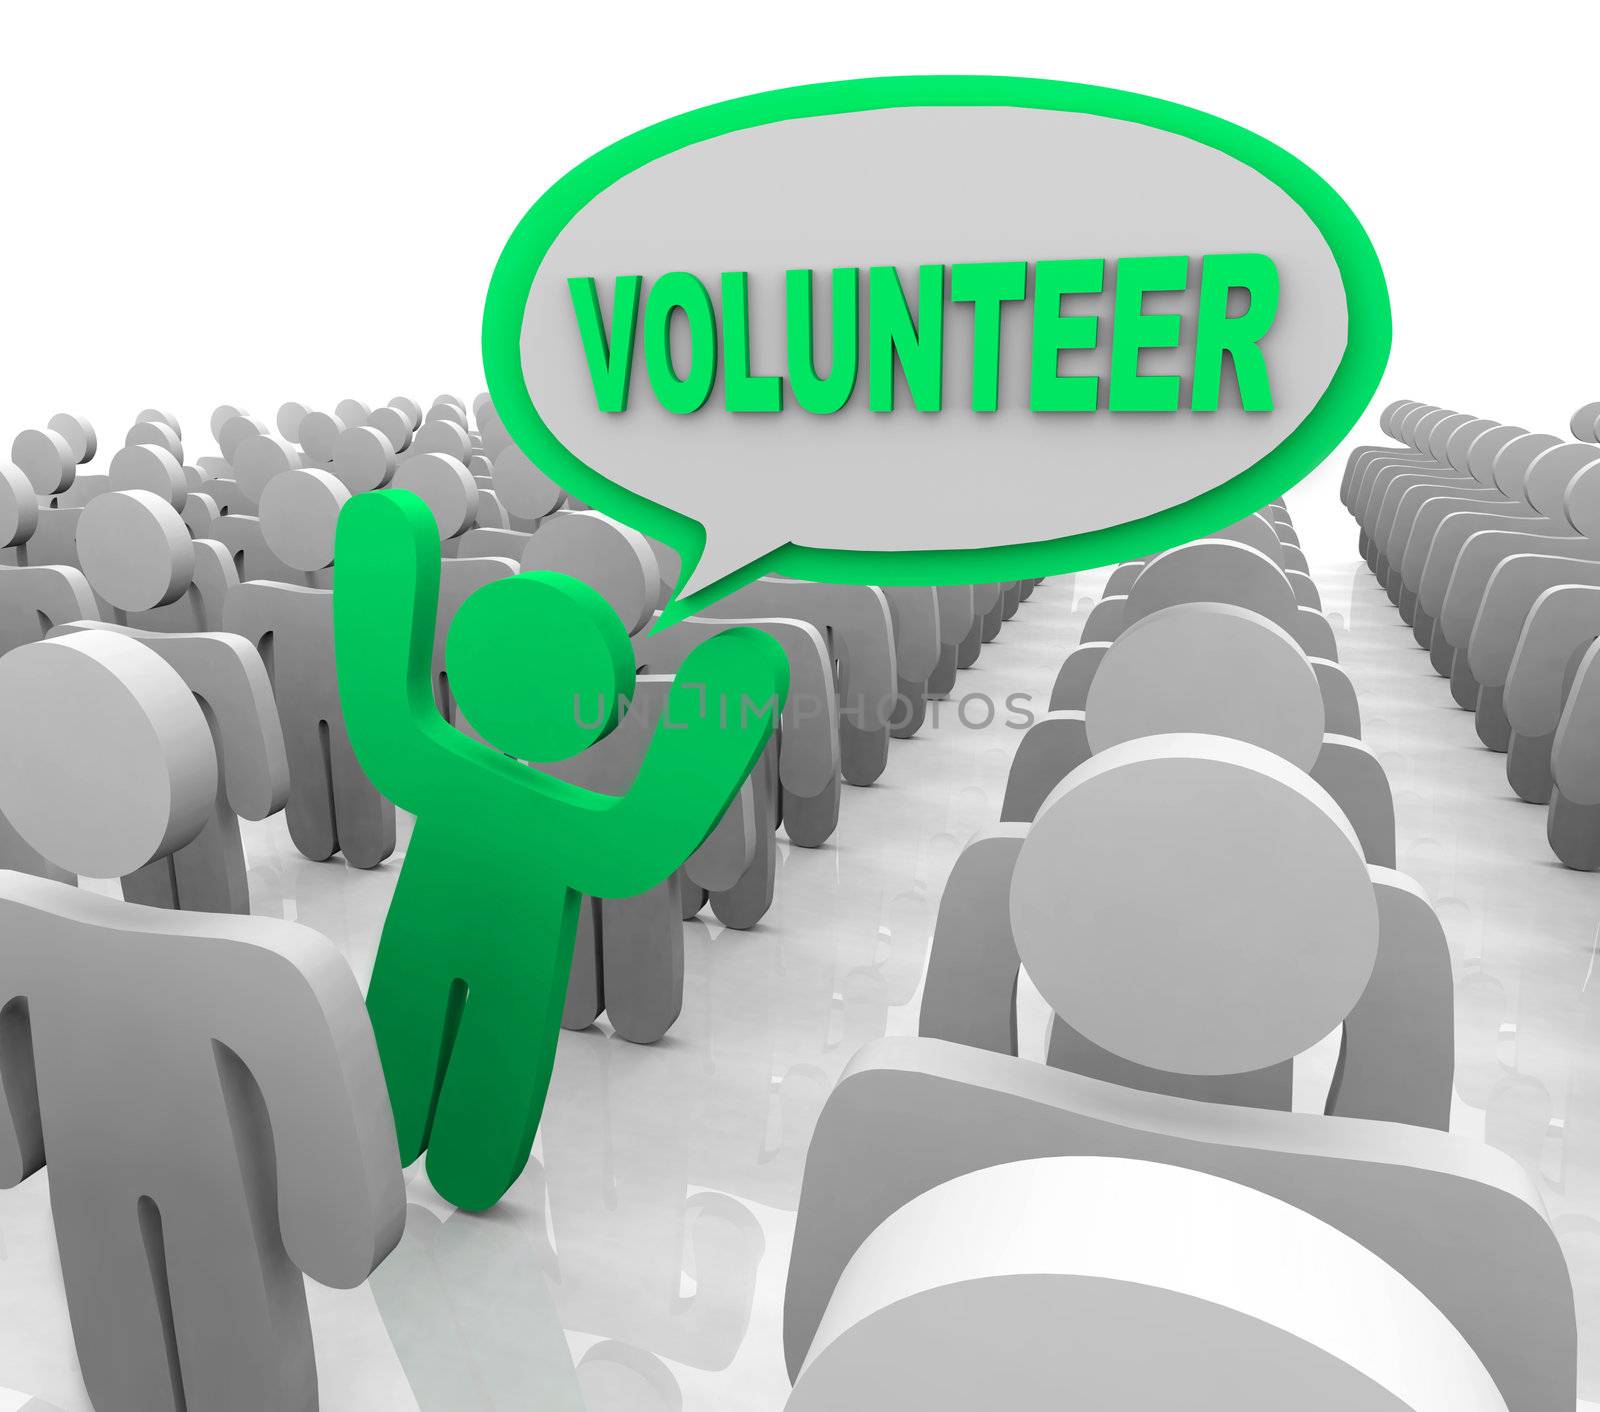 The word Volunteer in a speech bubble spoken by a person who is promoting volunteerism to help others in need